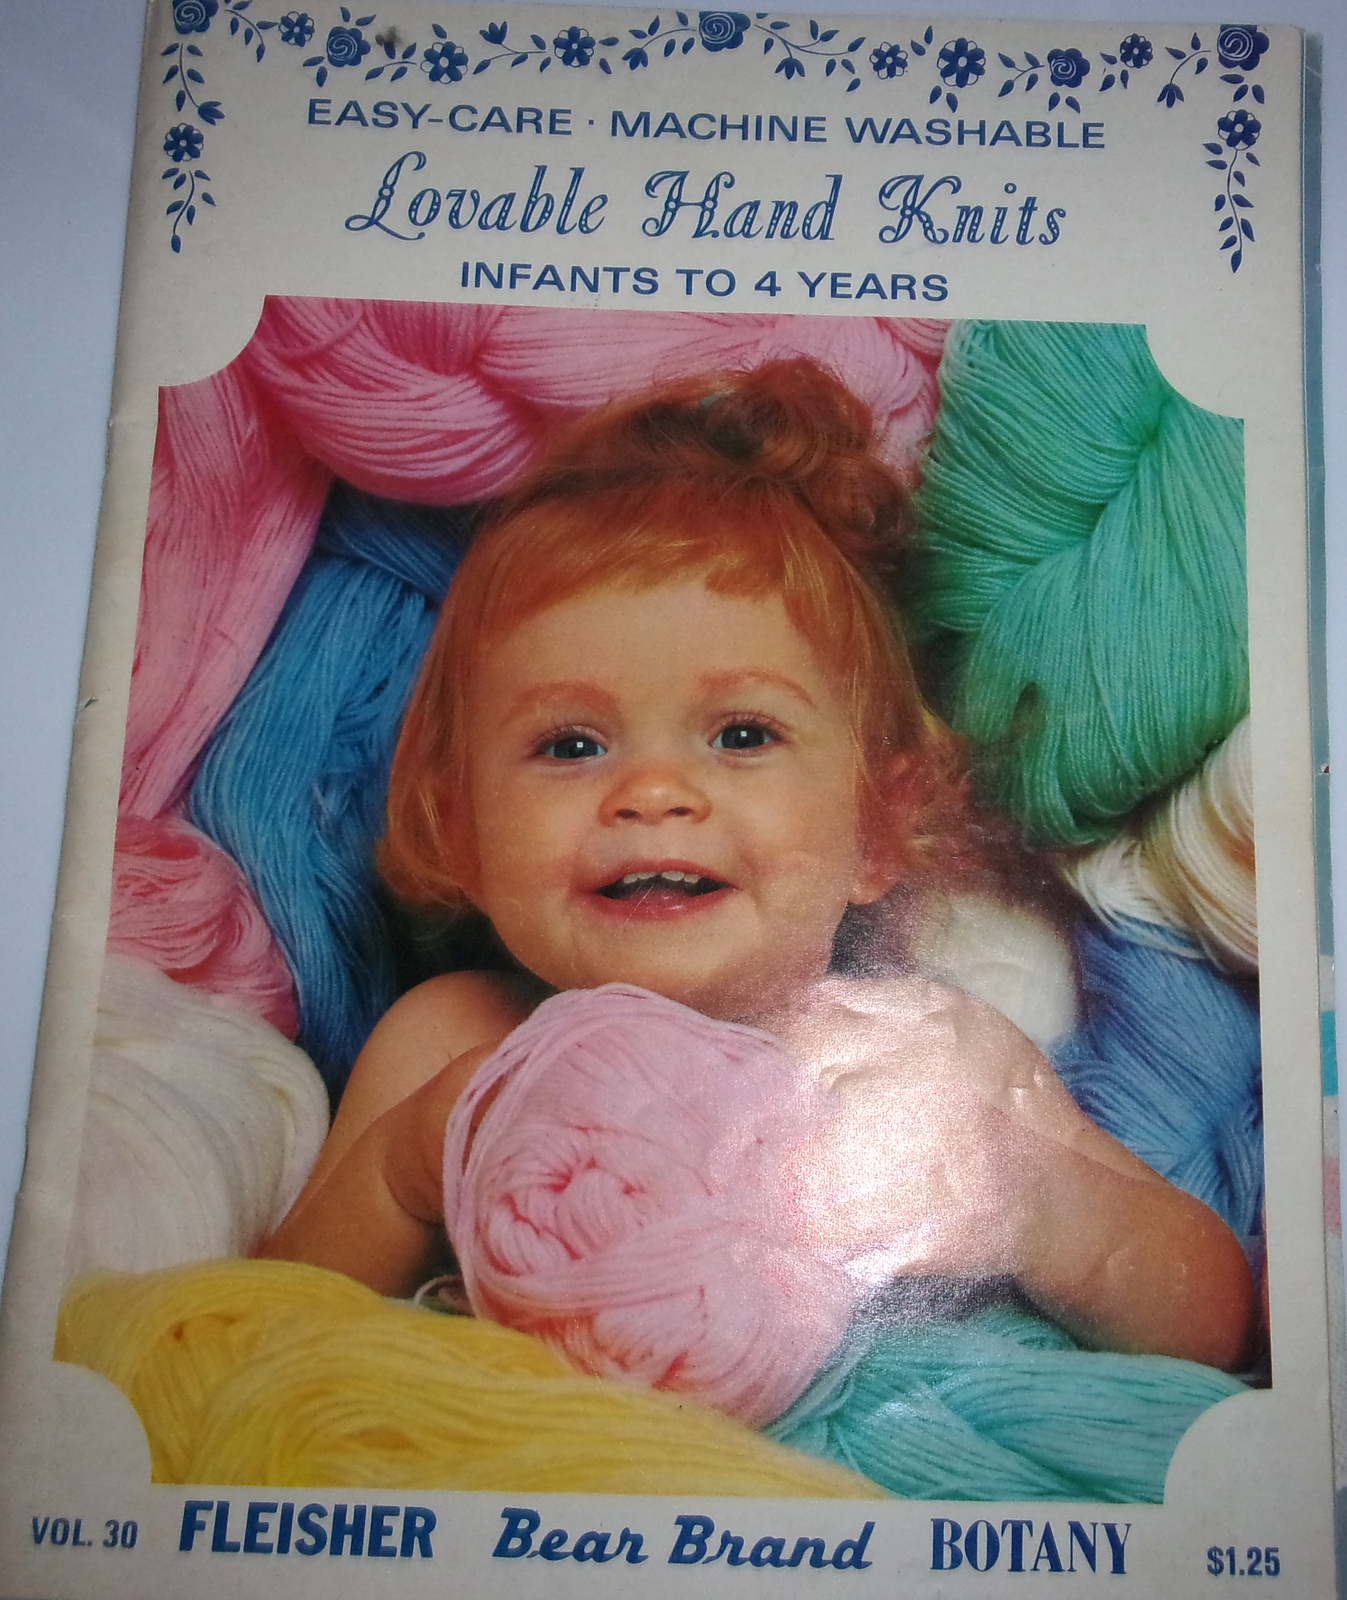 Lovable Hand Knits Infants to 4 Years Vol 30 Fleisher Bear Brand Botany 1968 - $4.99